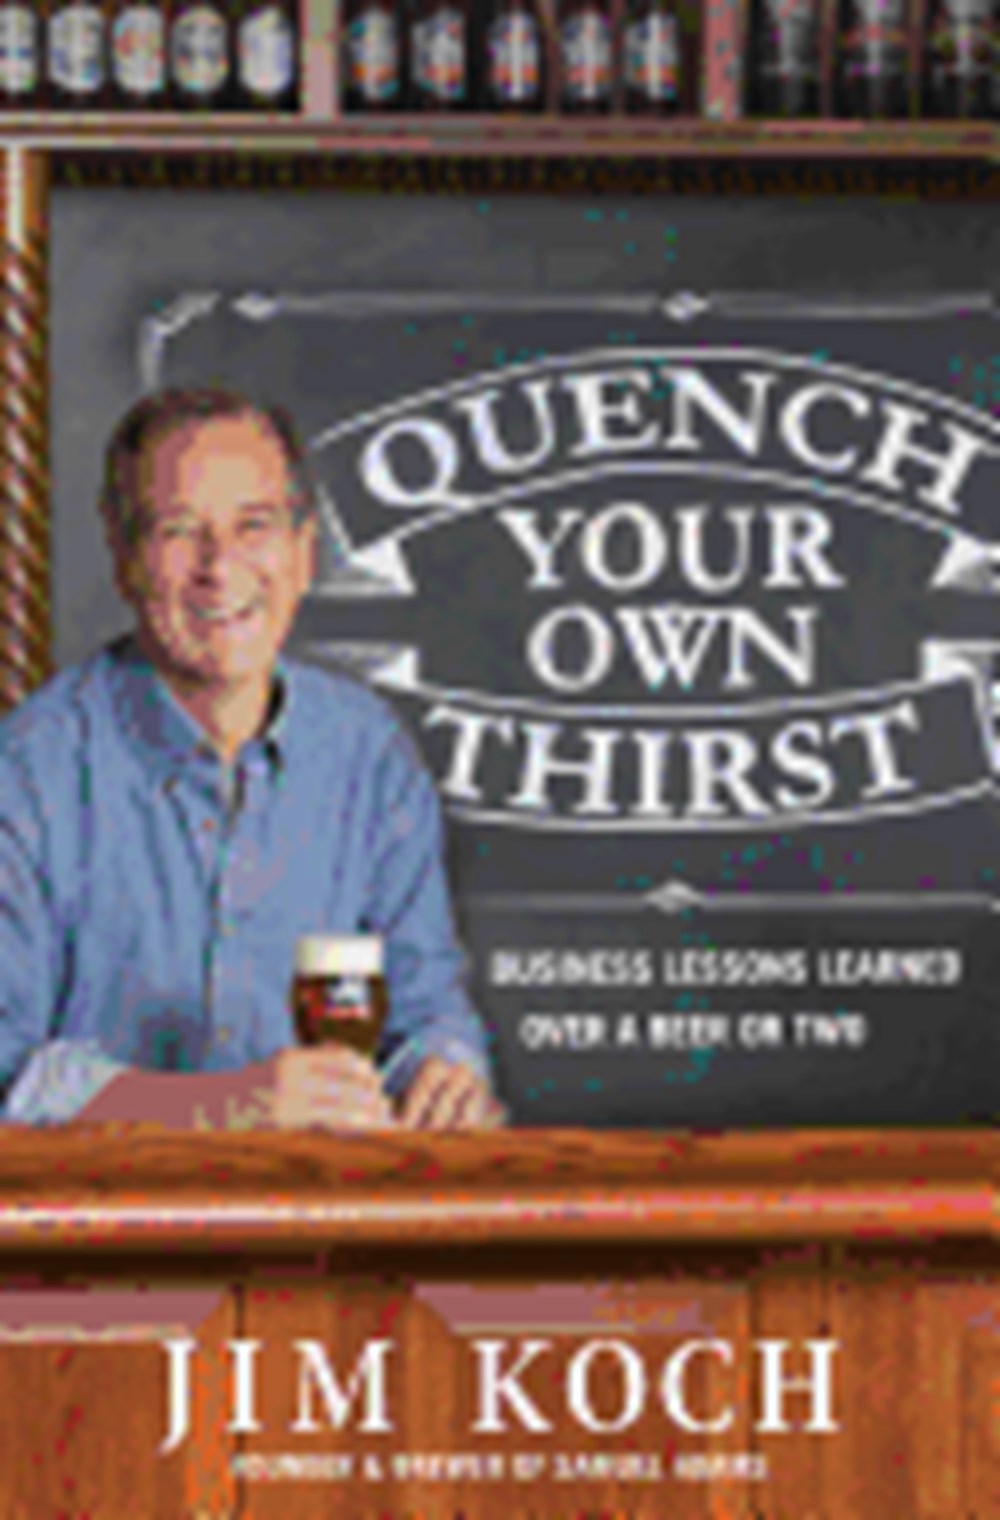 Quench Your Own Thirst Business Lessons Learned Over a Beer or Two